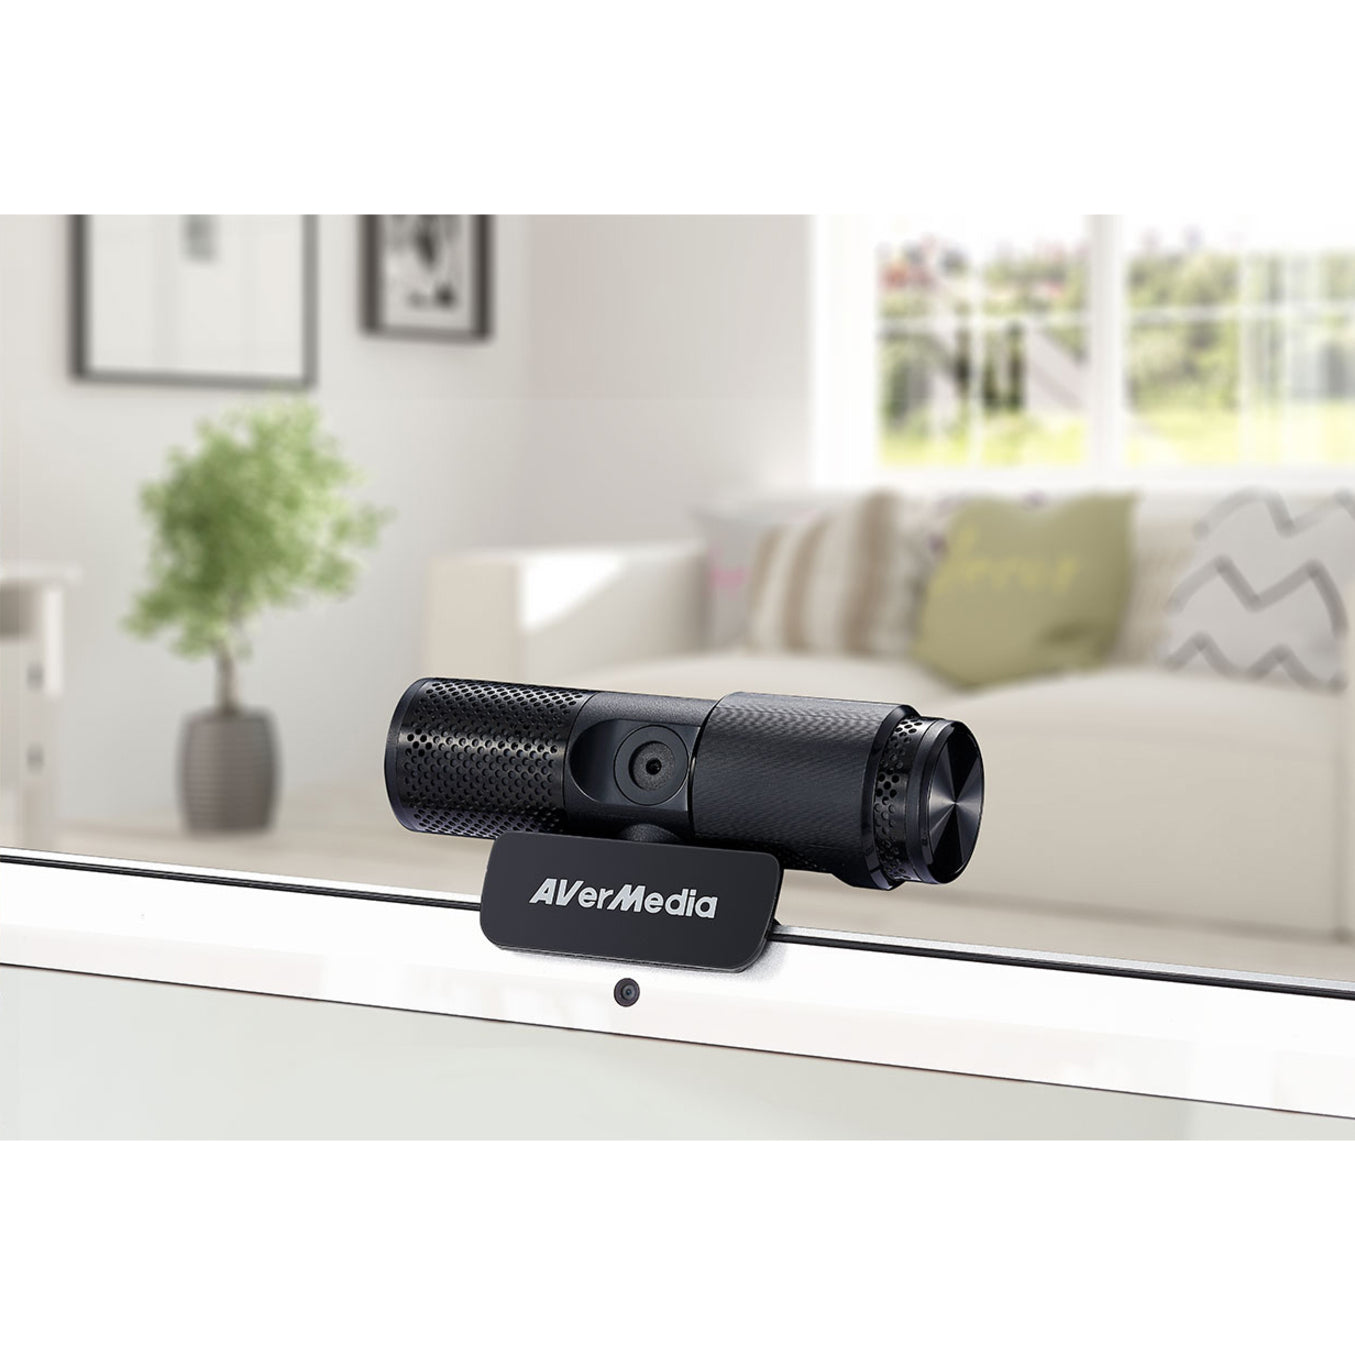 AVerMedia PW313 Live Streamer CAM 313, 1080p Webcam with Built-in Microphone